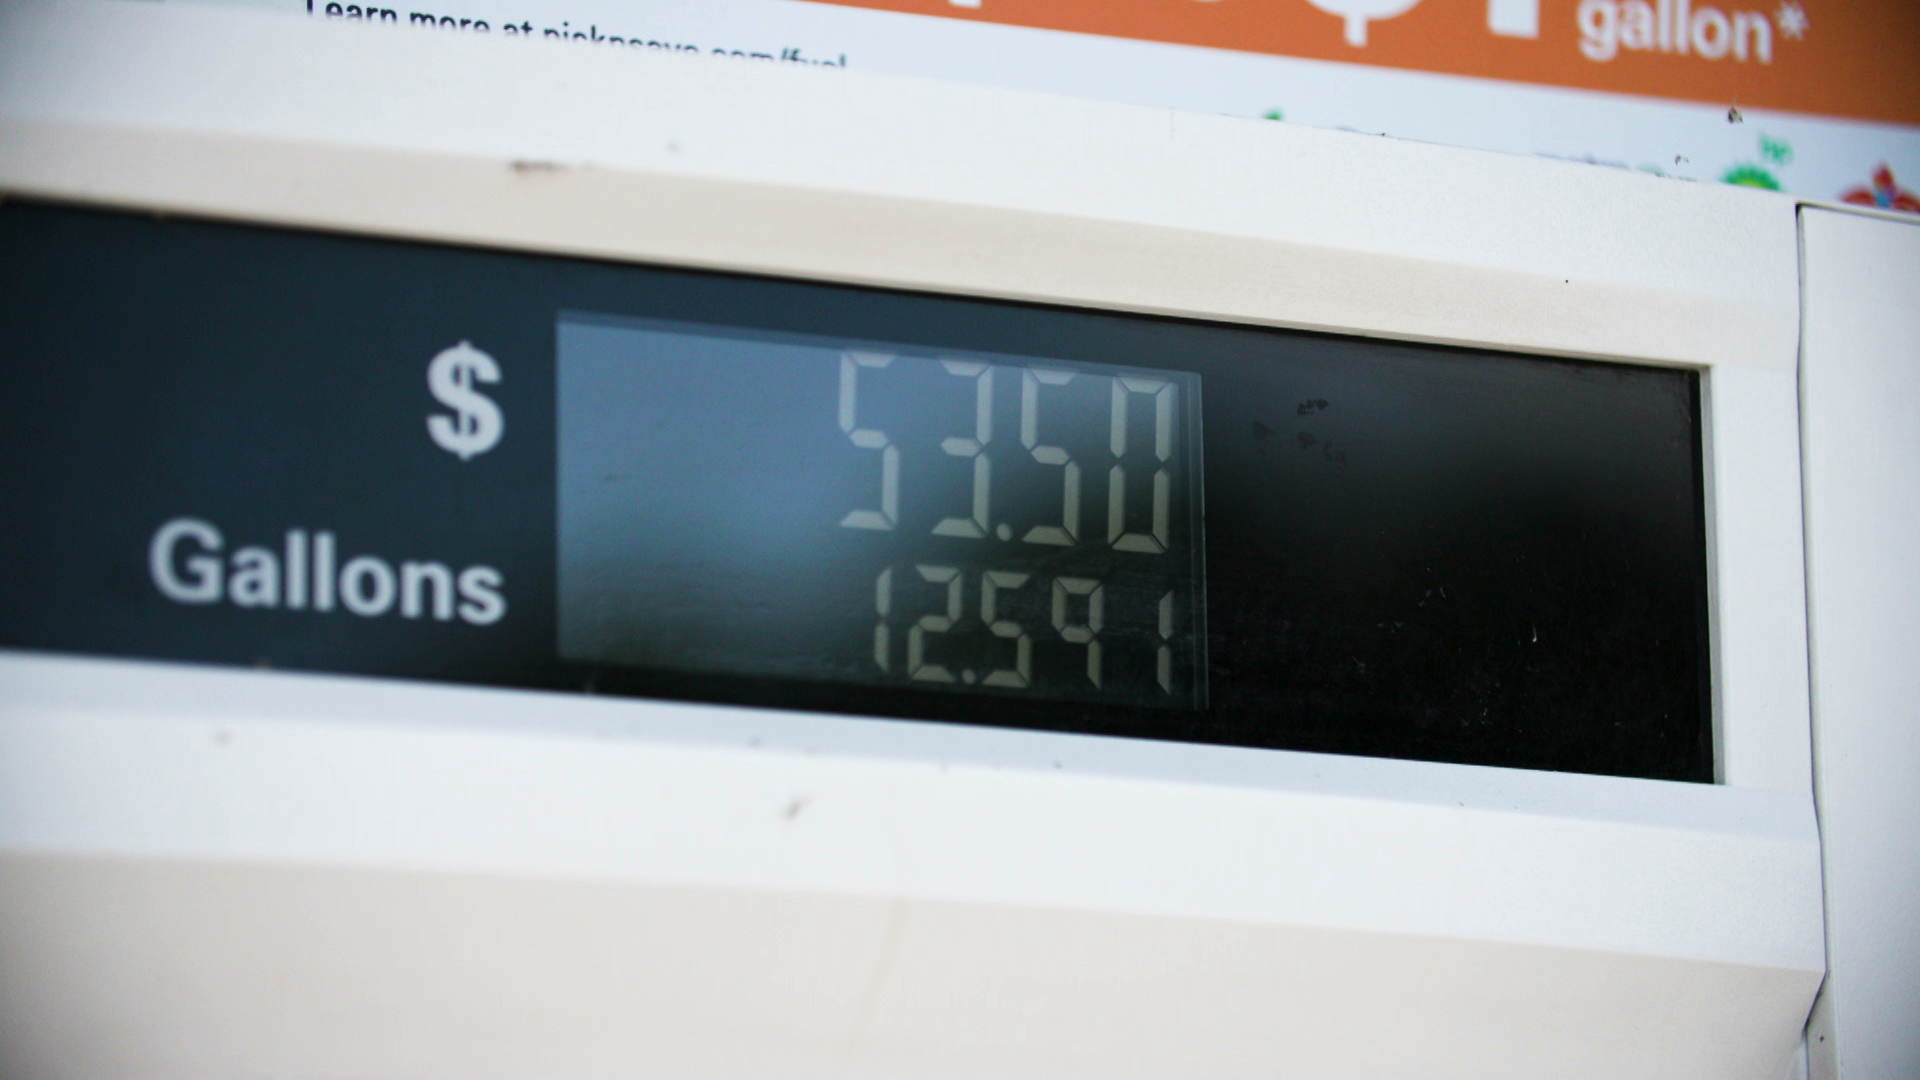 A gasoline pump display shows a price of $53.50 for 12.591 gallons.